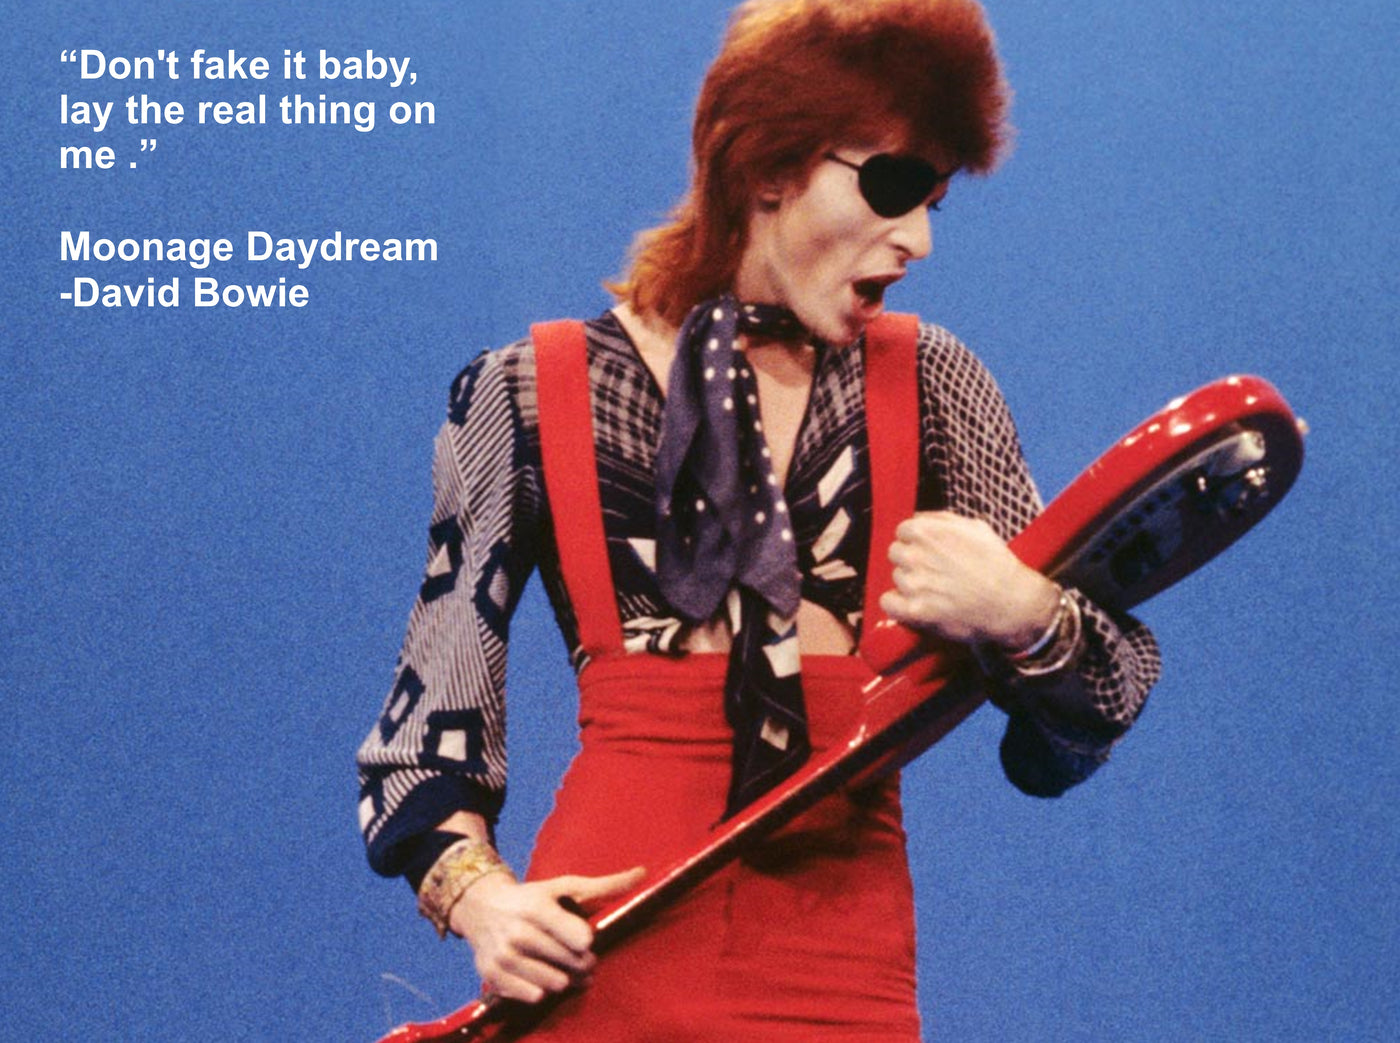 BOWIE QUOTES "Don't Fake It Baby, Lay The Real Thing On Me"